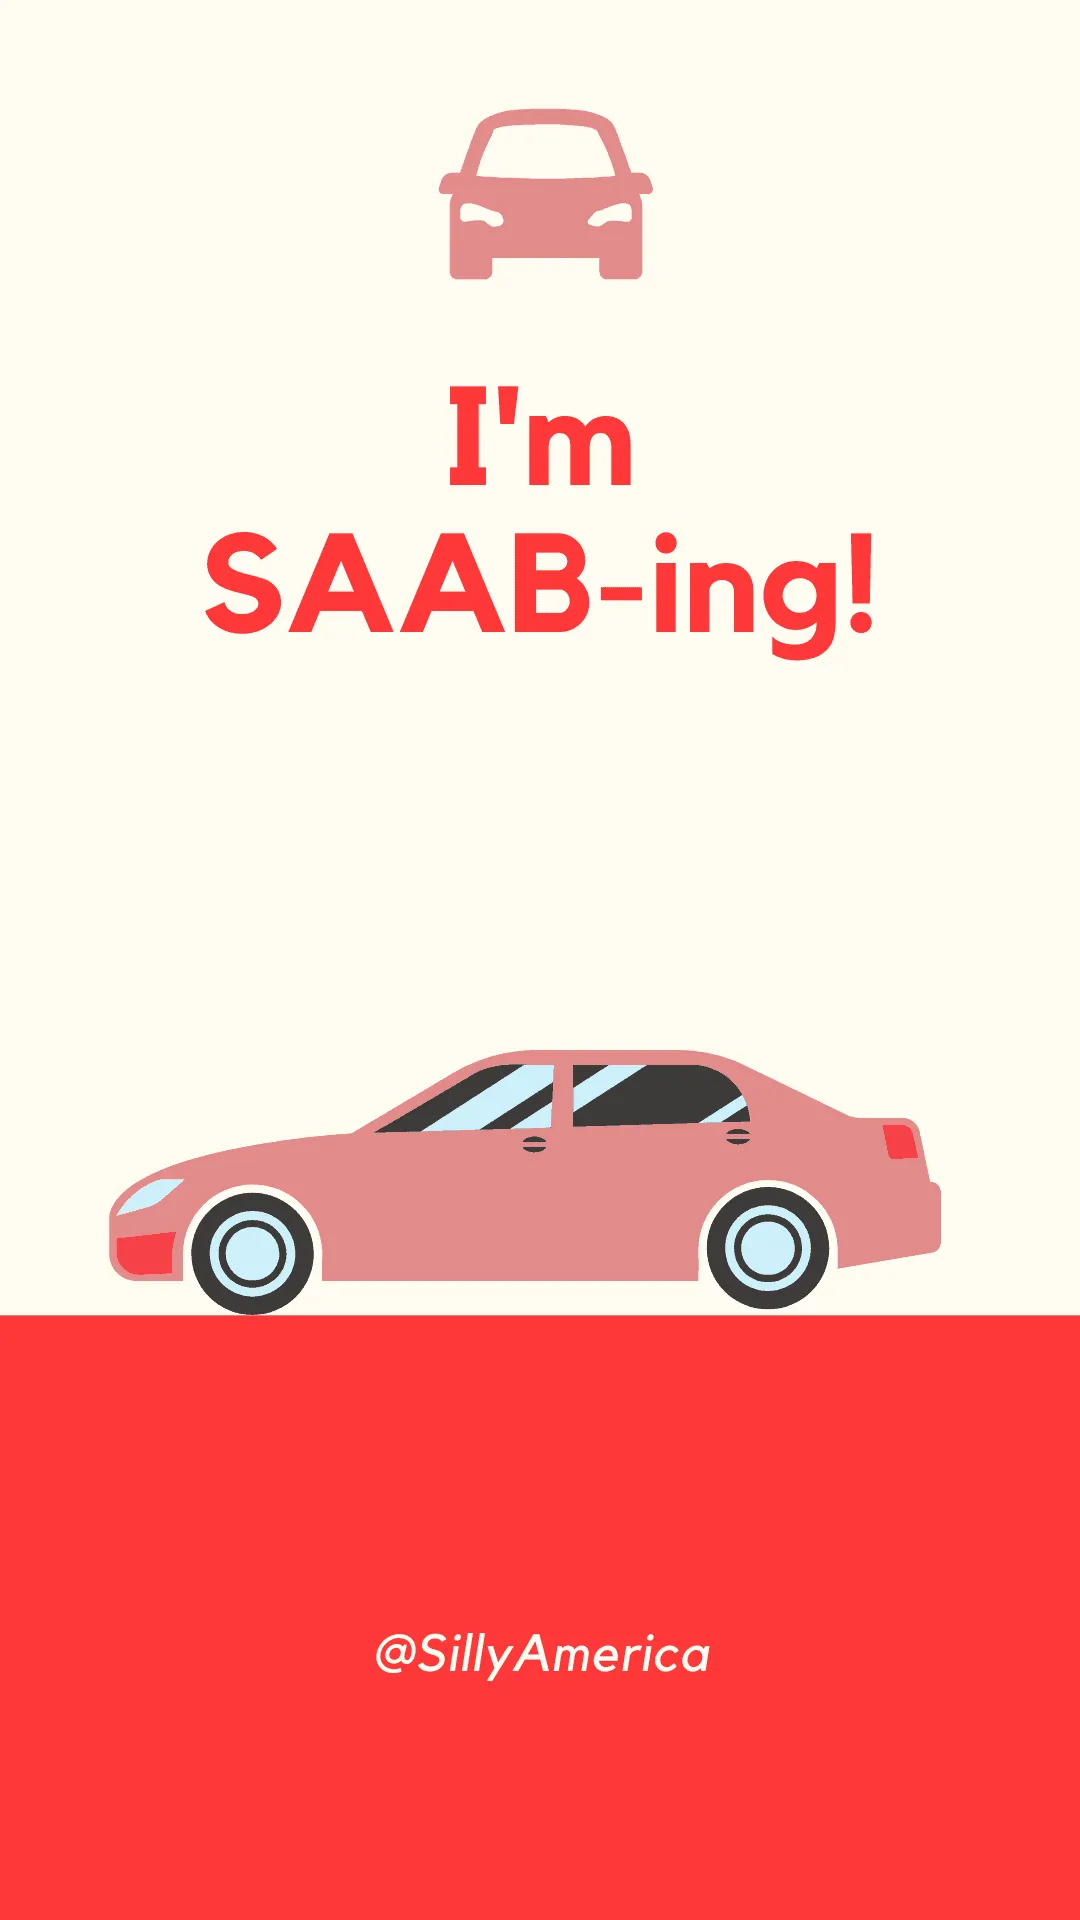 I'm SAAB-ing! - Car Puns to fuel your road trip content!